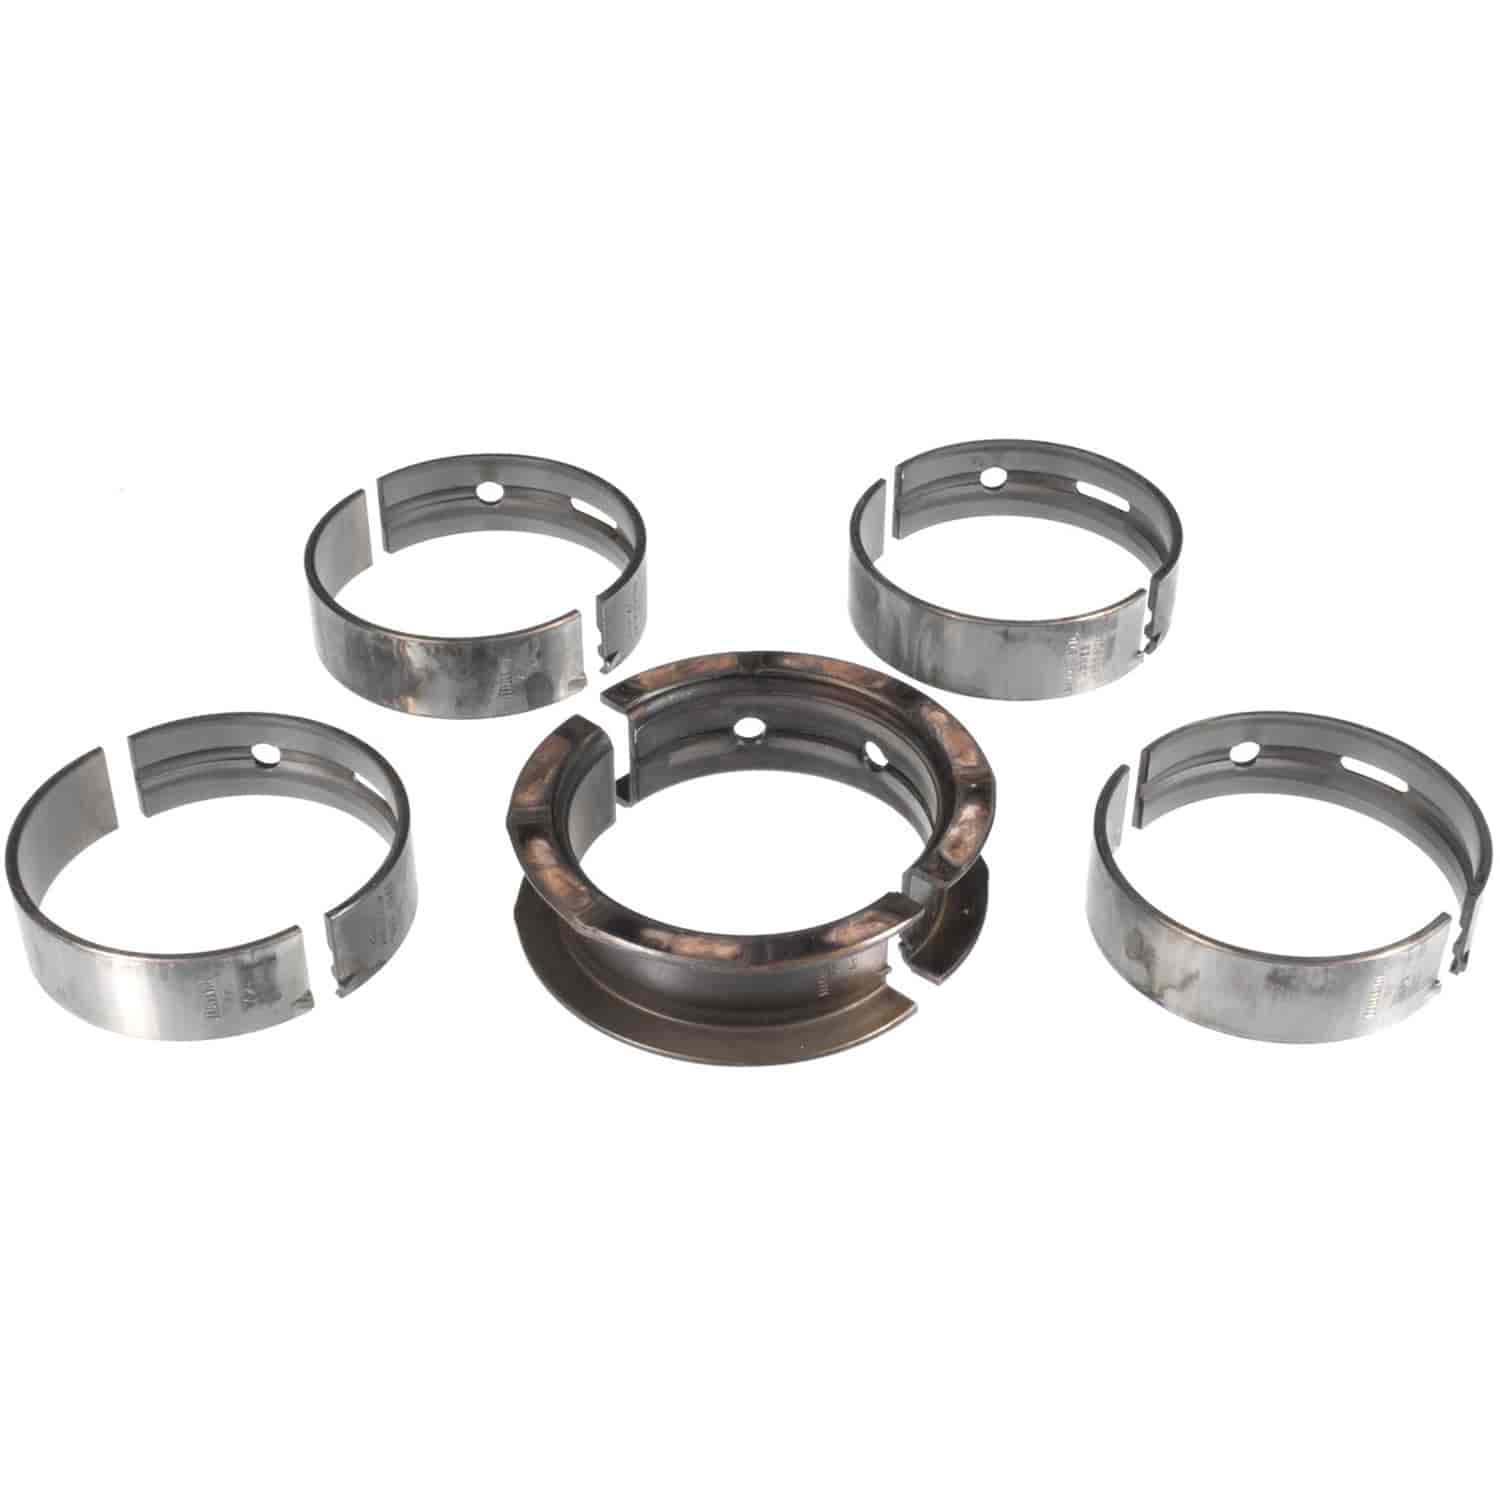 Main Bearing Set GM/Chevy 2006-2015 LS V8 6.2L Supercharged & 7.0L (LSA/LS7/LS9) with Standard Size